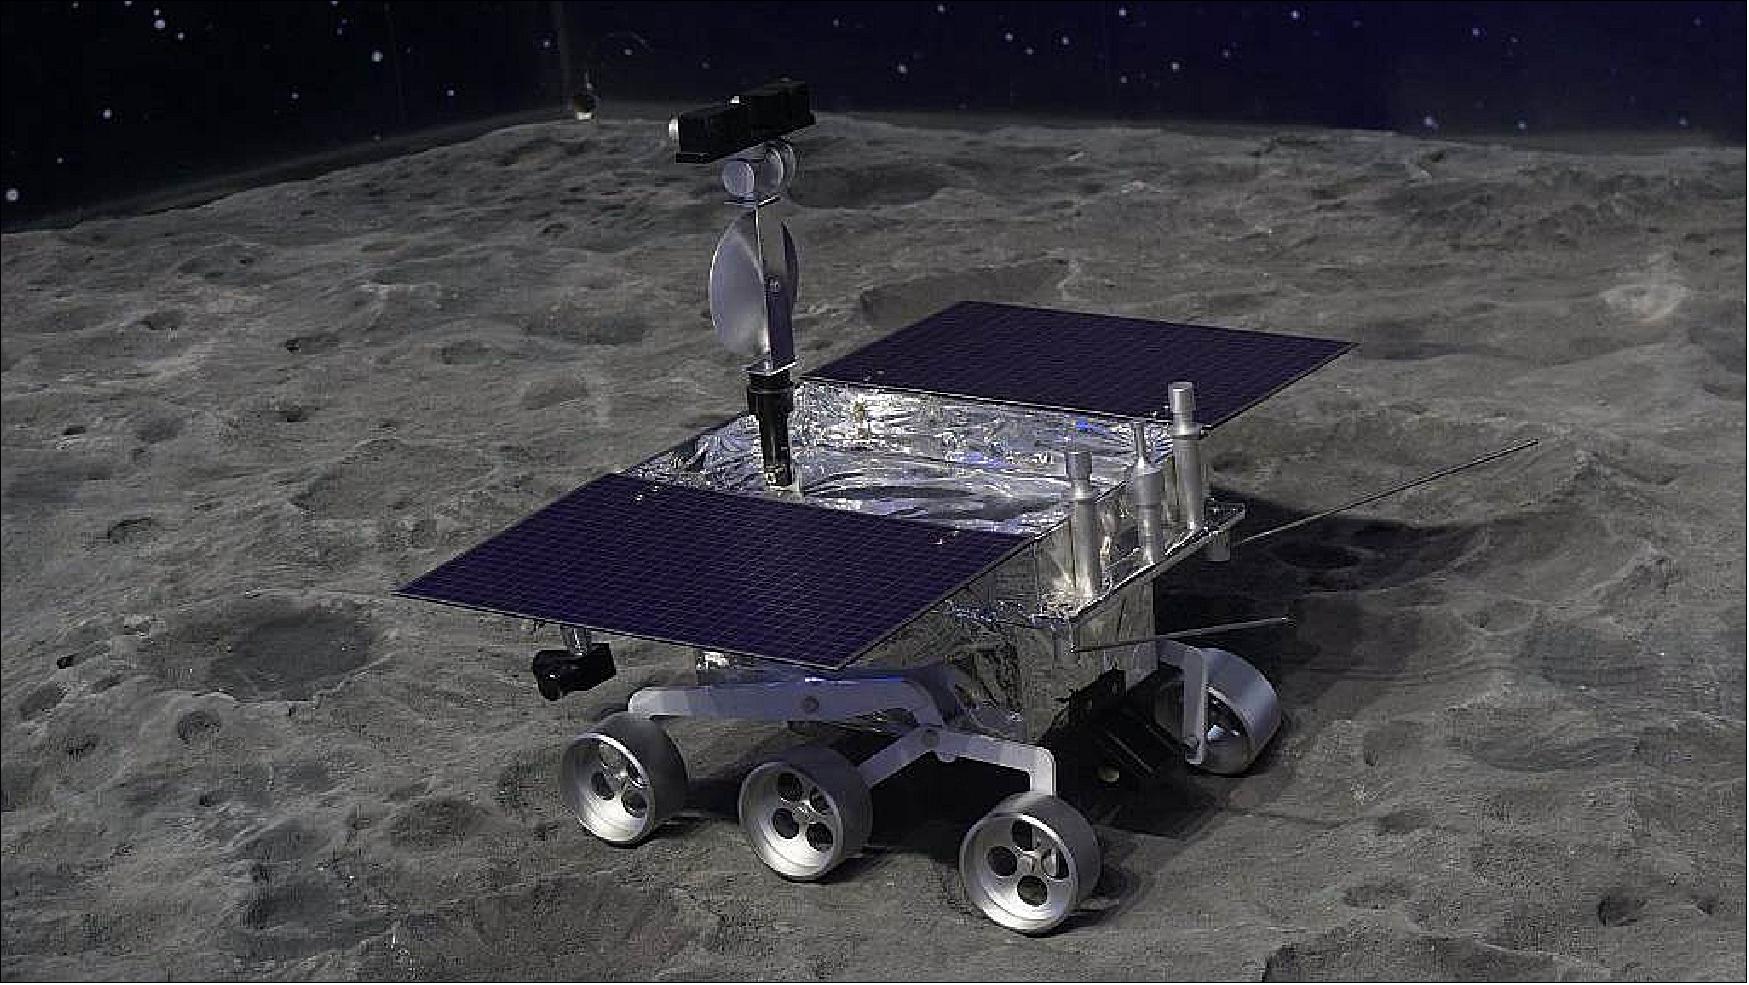 Figure 18: The rover Yutu-2 has traveled over 345 meters on Moon's far side (image credit: VCG Photo)